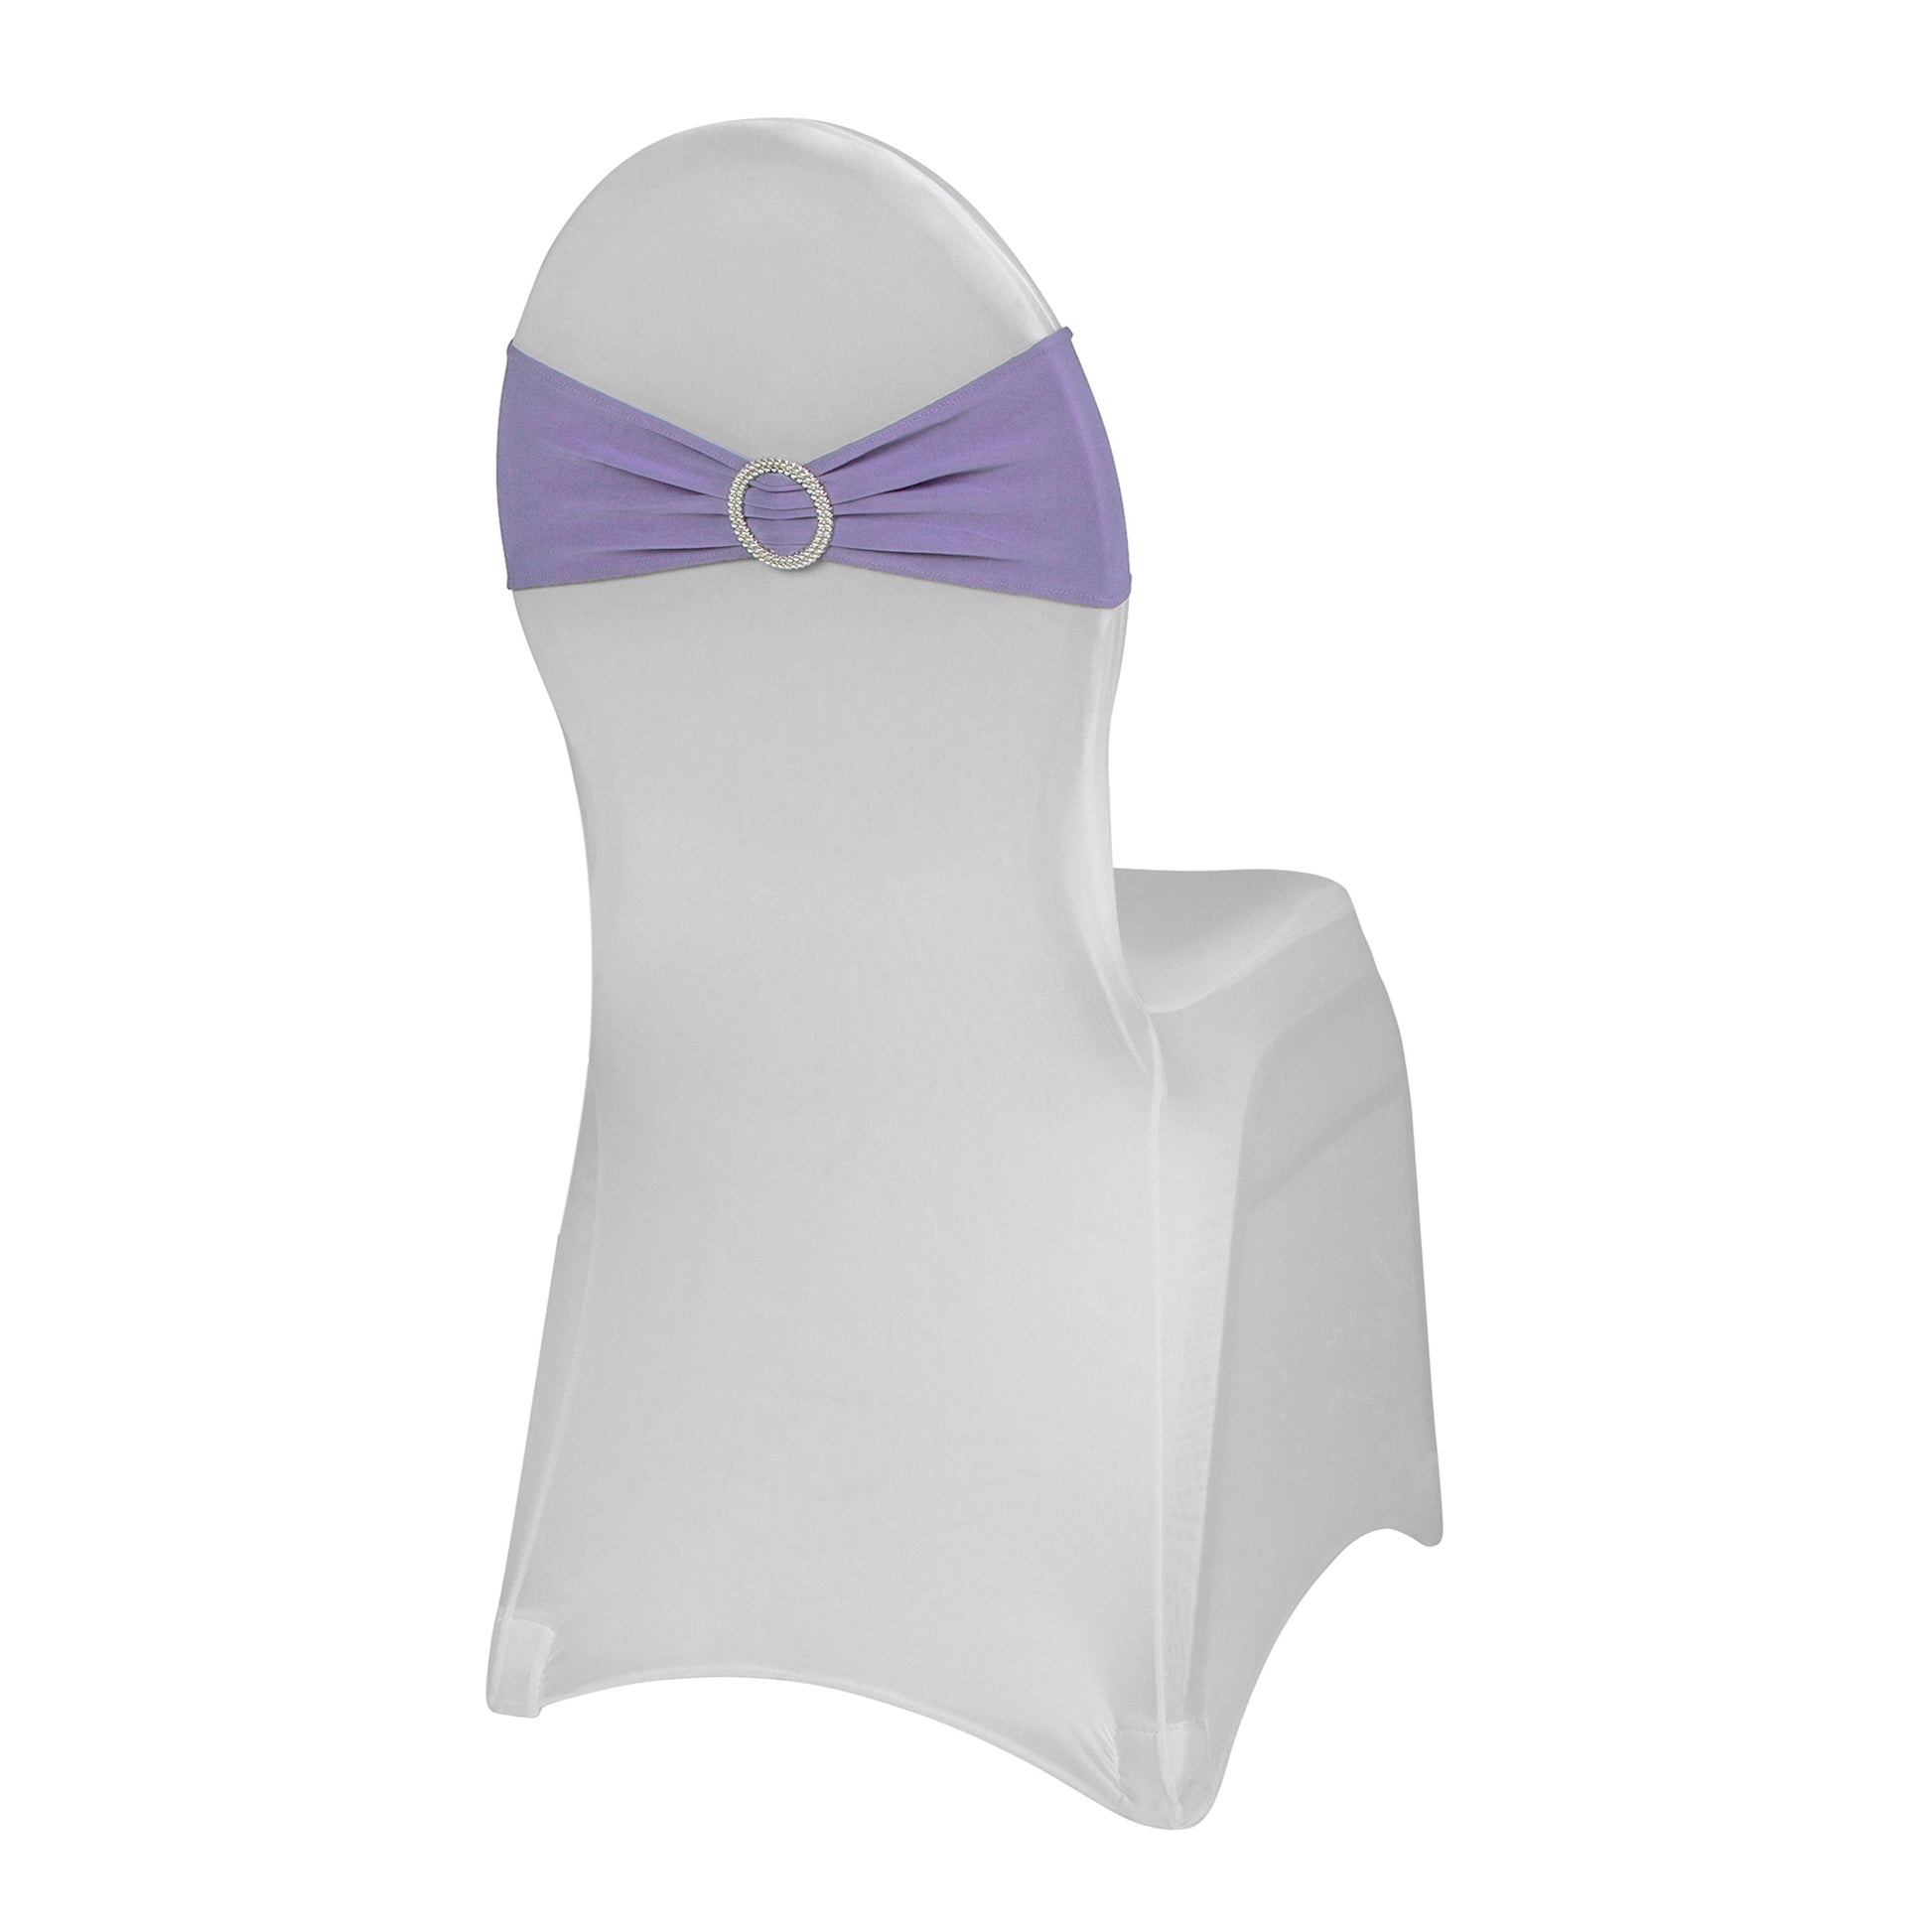 Buckle Spandex Stretch Chair Band - Victorian Lilac/Wisteria